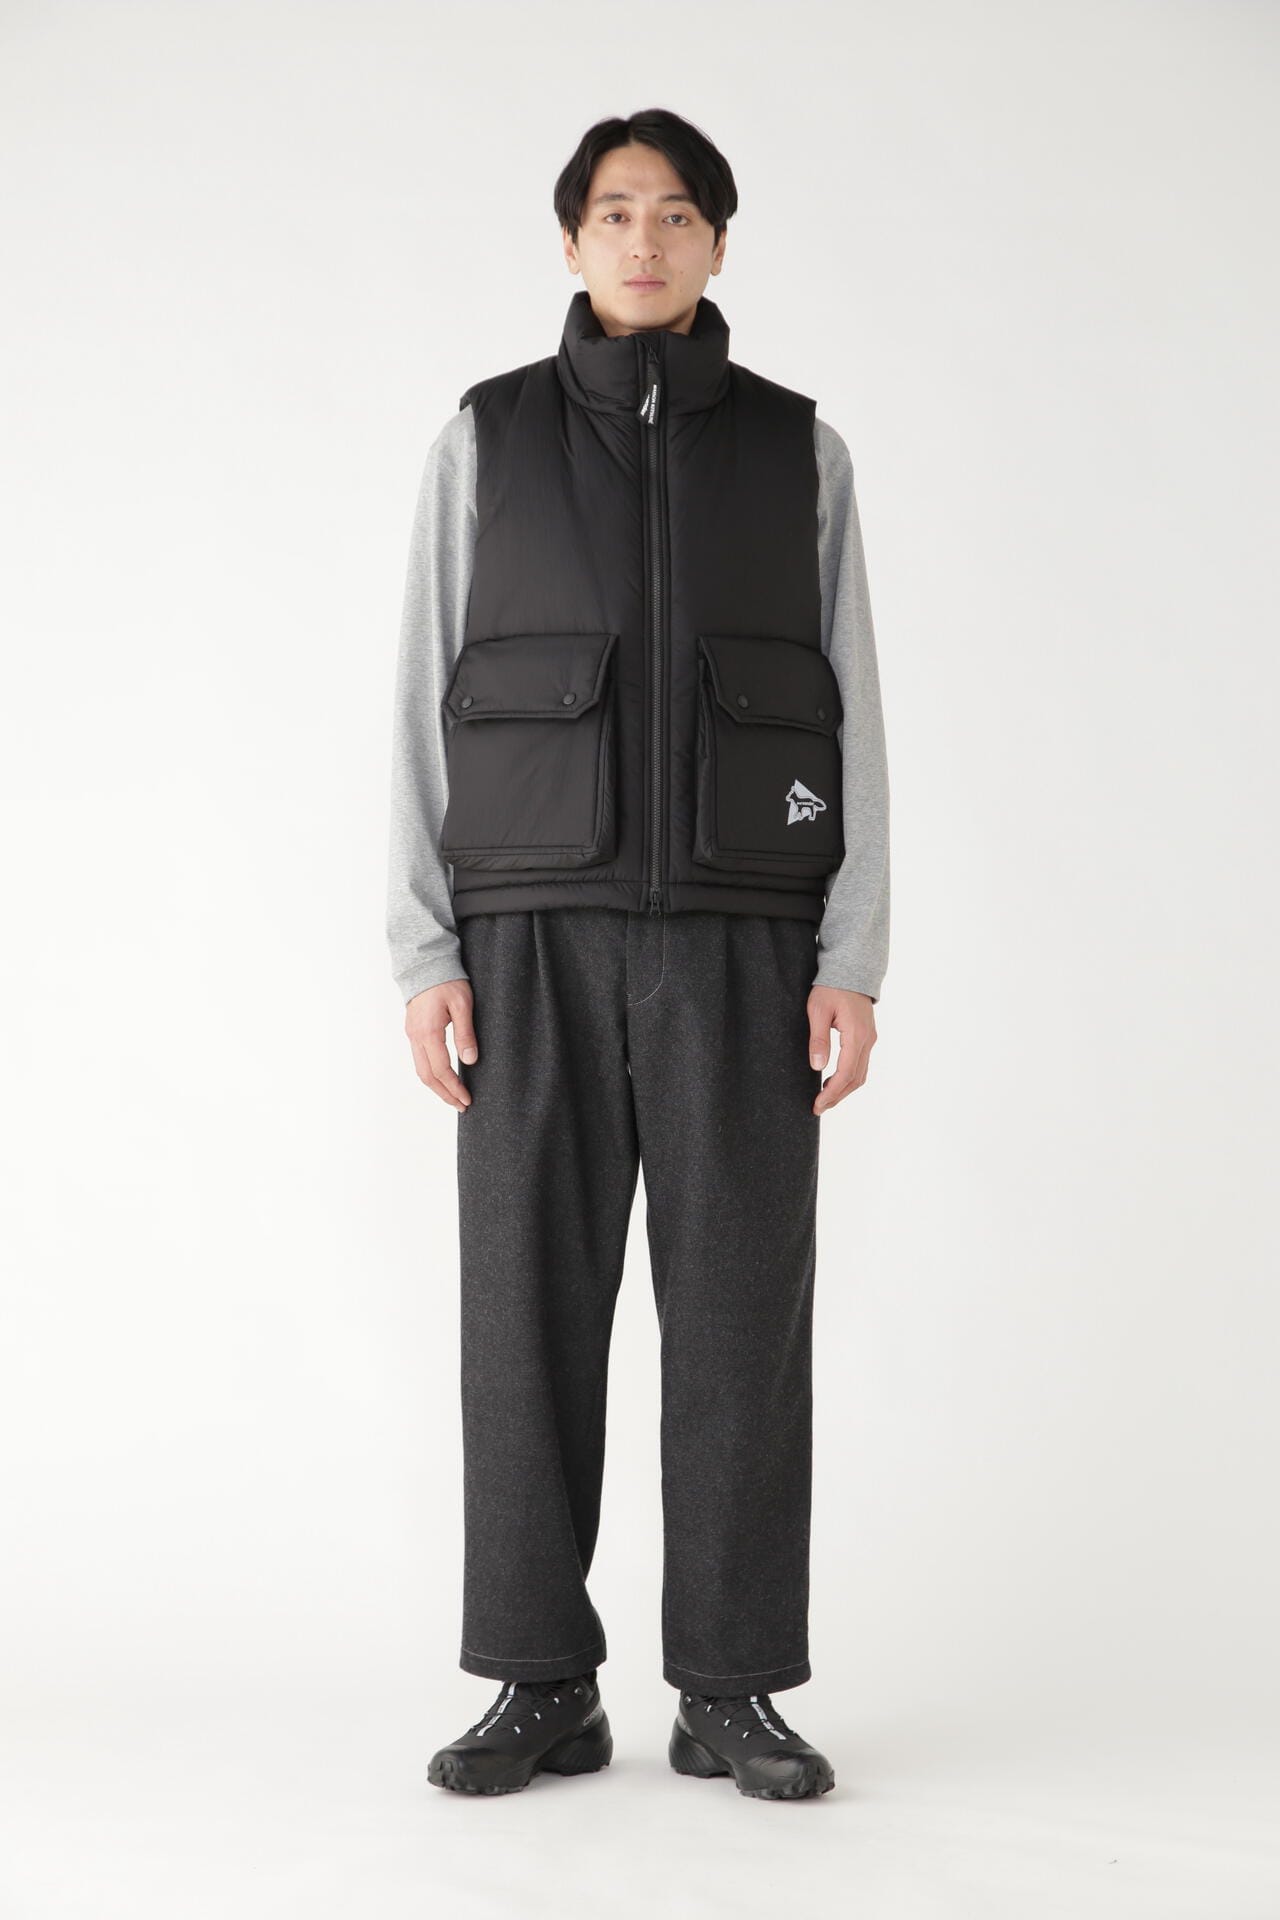 MAISON KITSUNÉ × and wander insulation vest | outerwear | and 